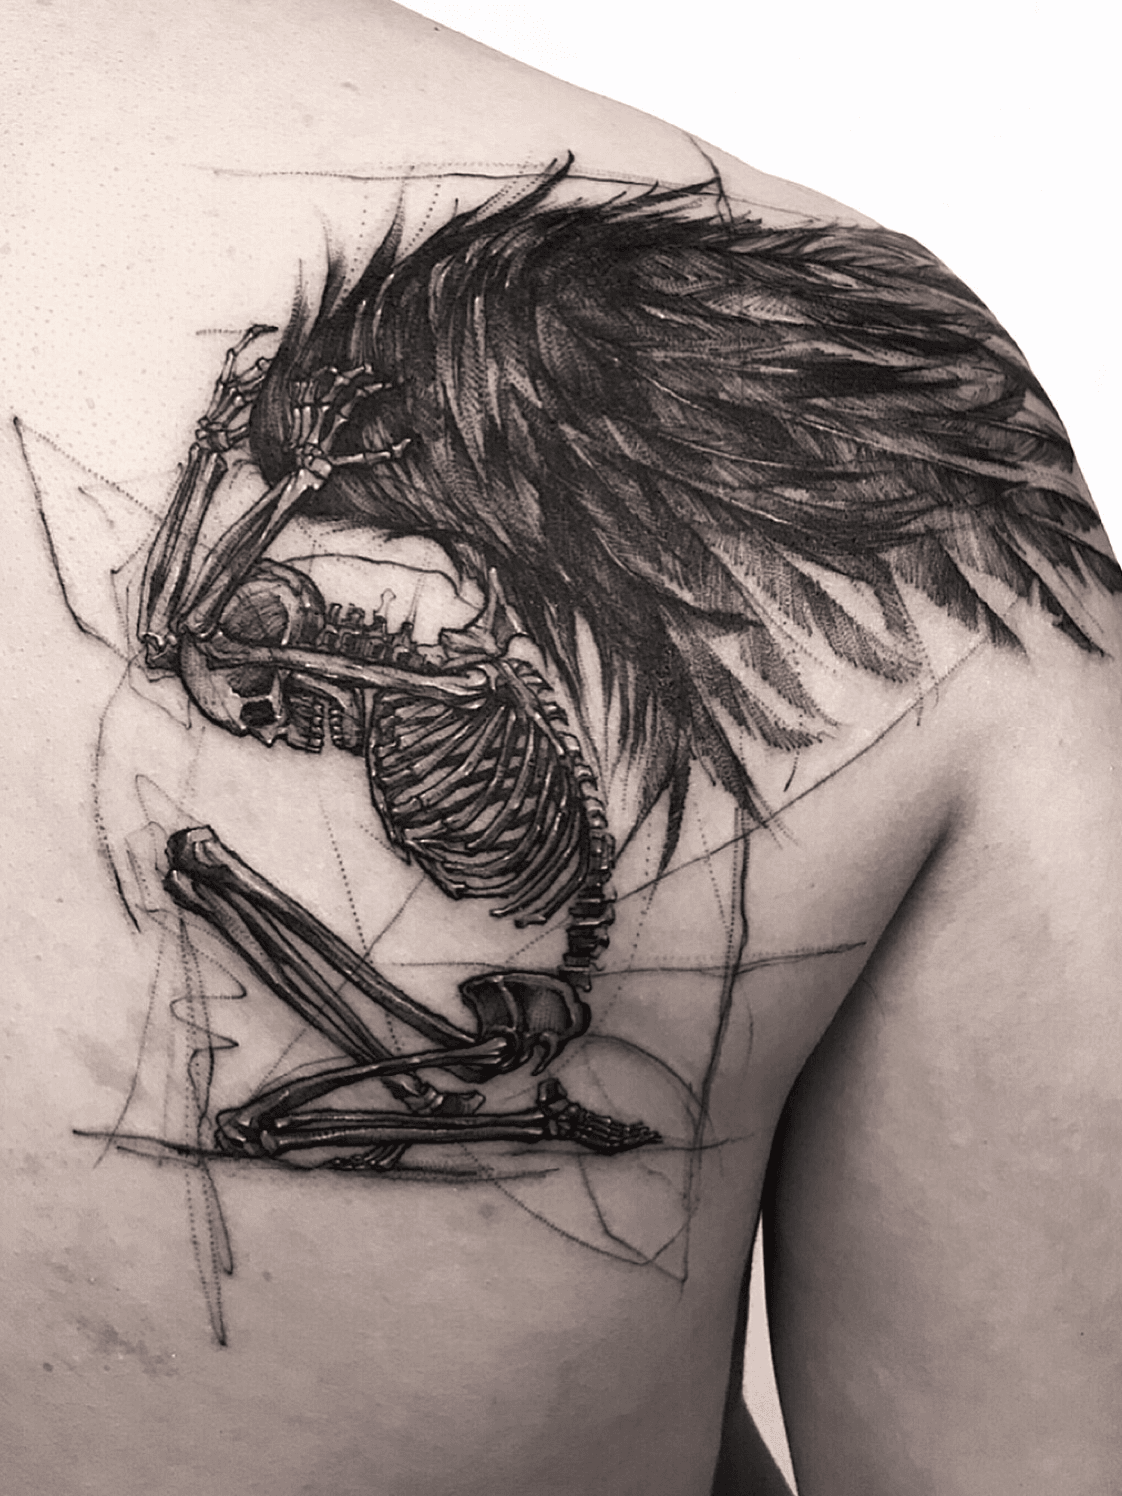 Details more than 77 skeleton angel wings tattoo best  thtantai2